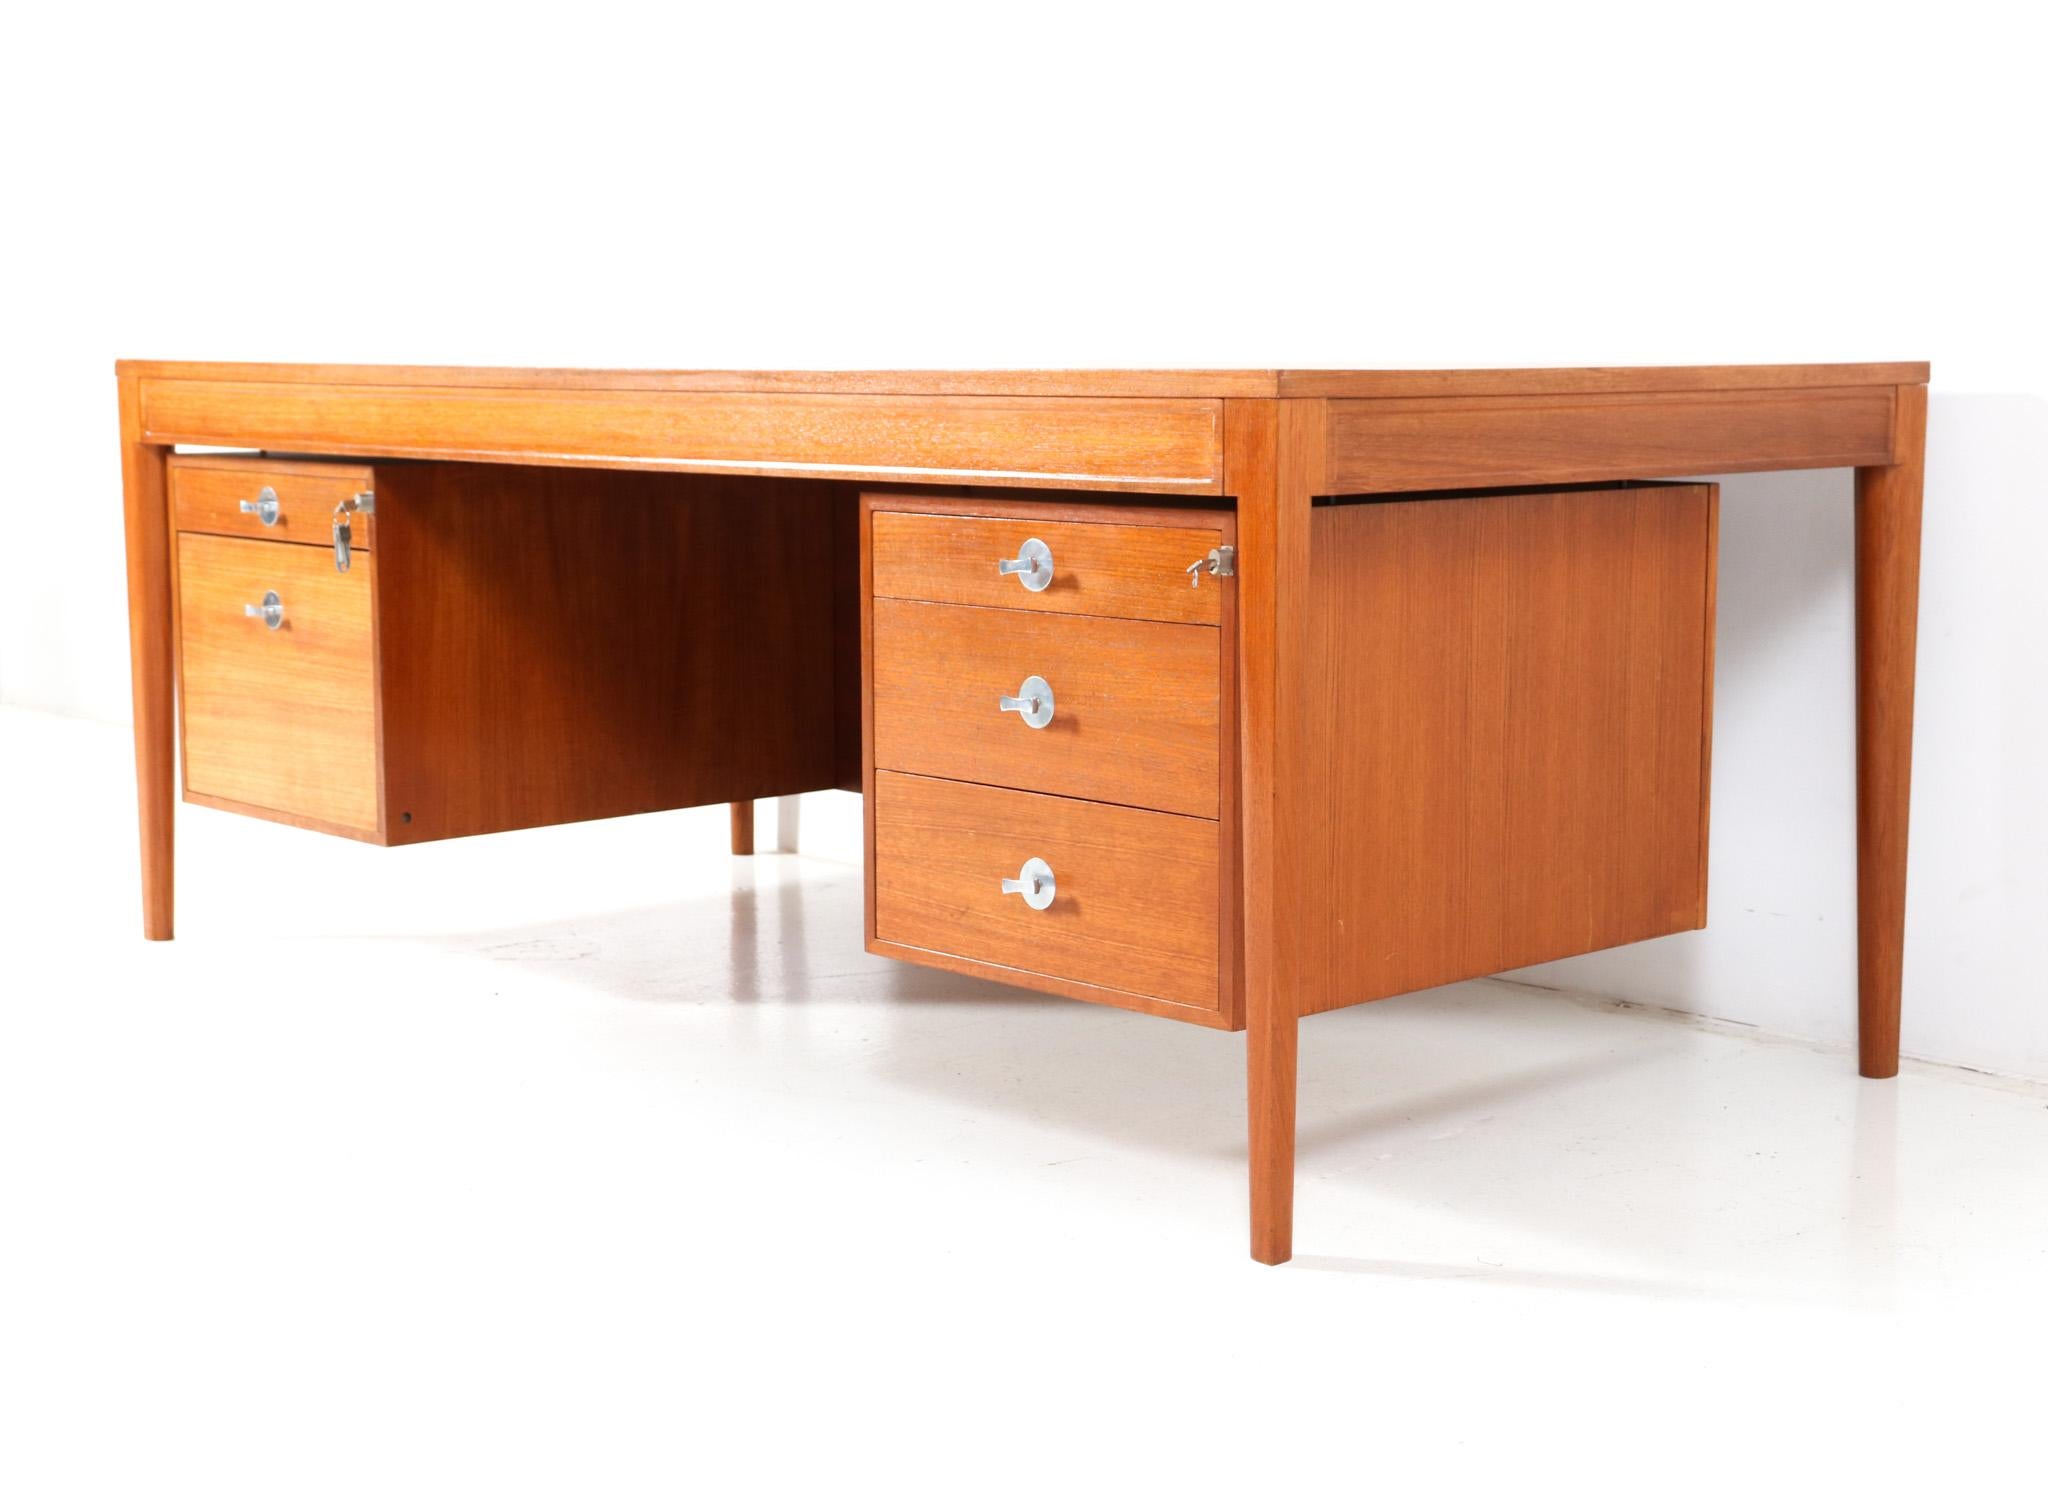 Magnificent and large Mid-Century Modern executive Diplomat FD-951 desk.
Design by Finn Juhl for France & Søn.
Striking Danish design from the 1960s.
Solid teak and original teak veneered top with original chrome knobs on the five drawers.
This